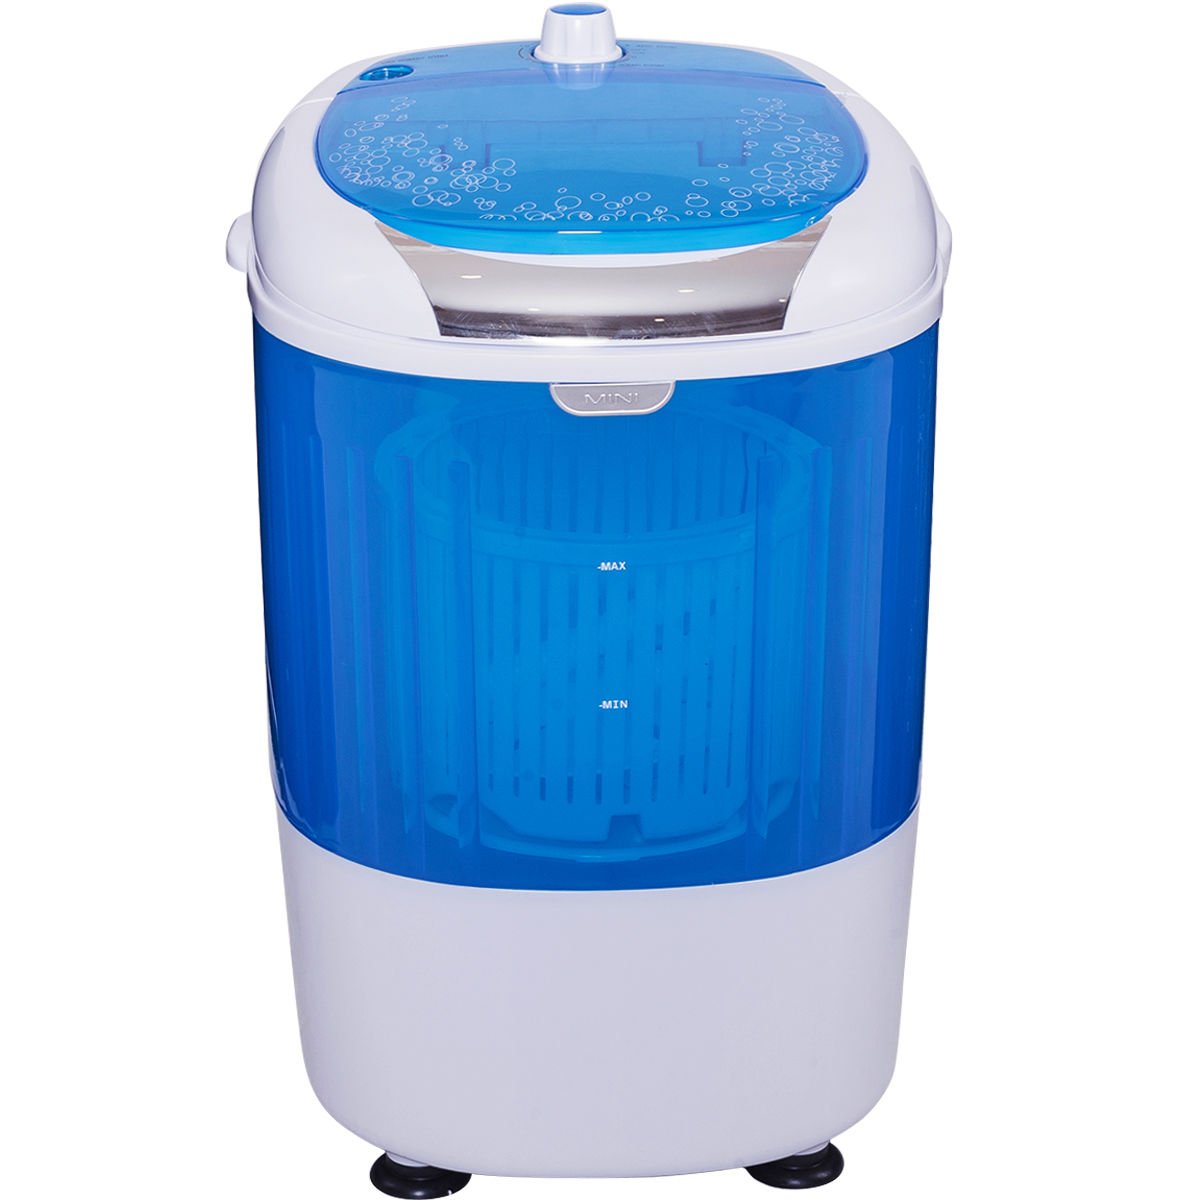 5.5 lbs Portable Semi Auto Washing Machine for Small Space, Blue at Gallery Canada